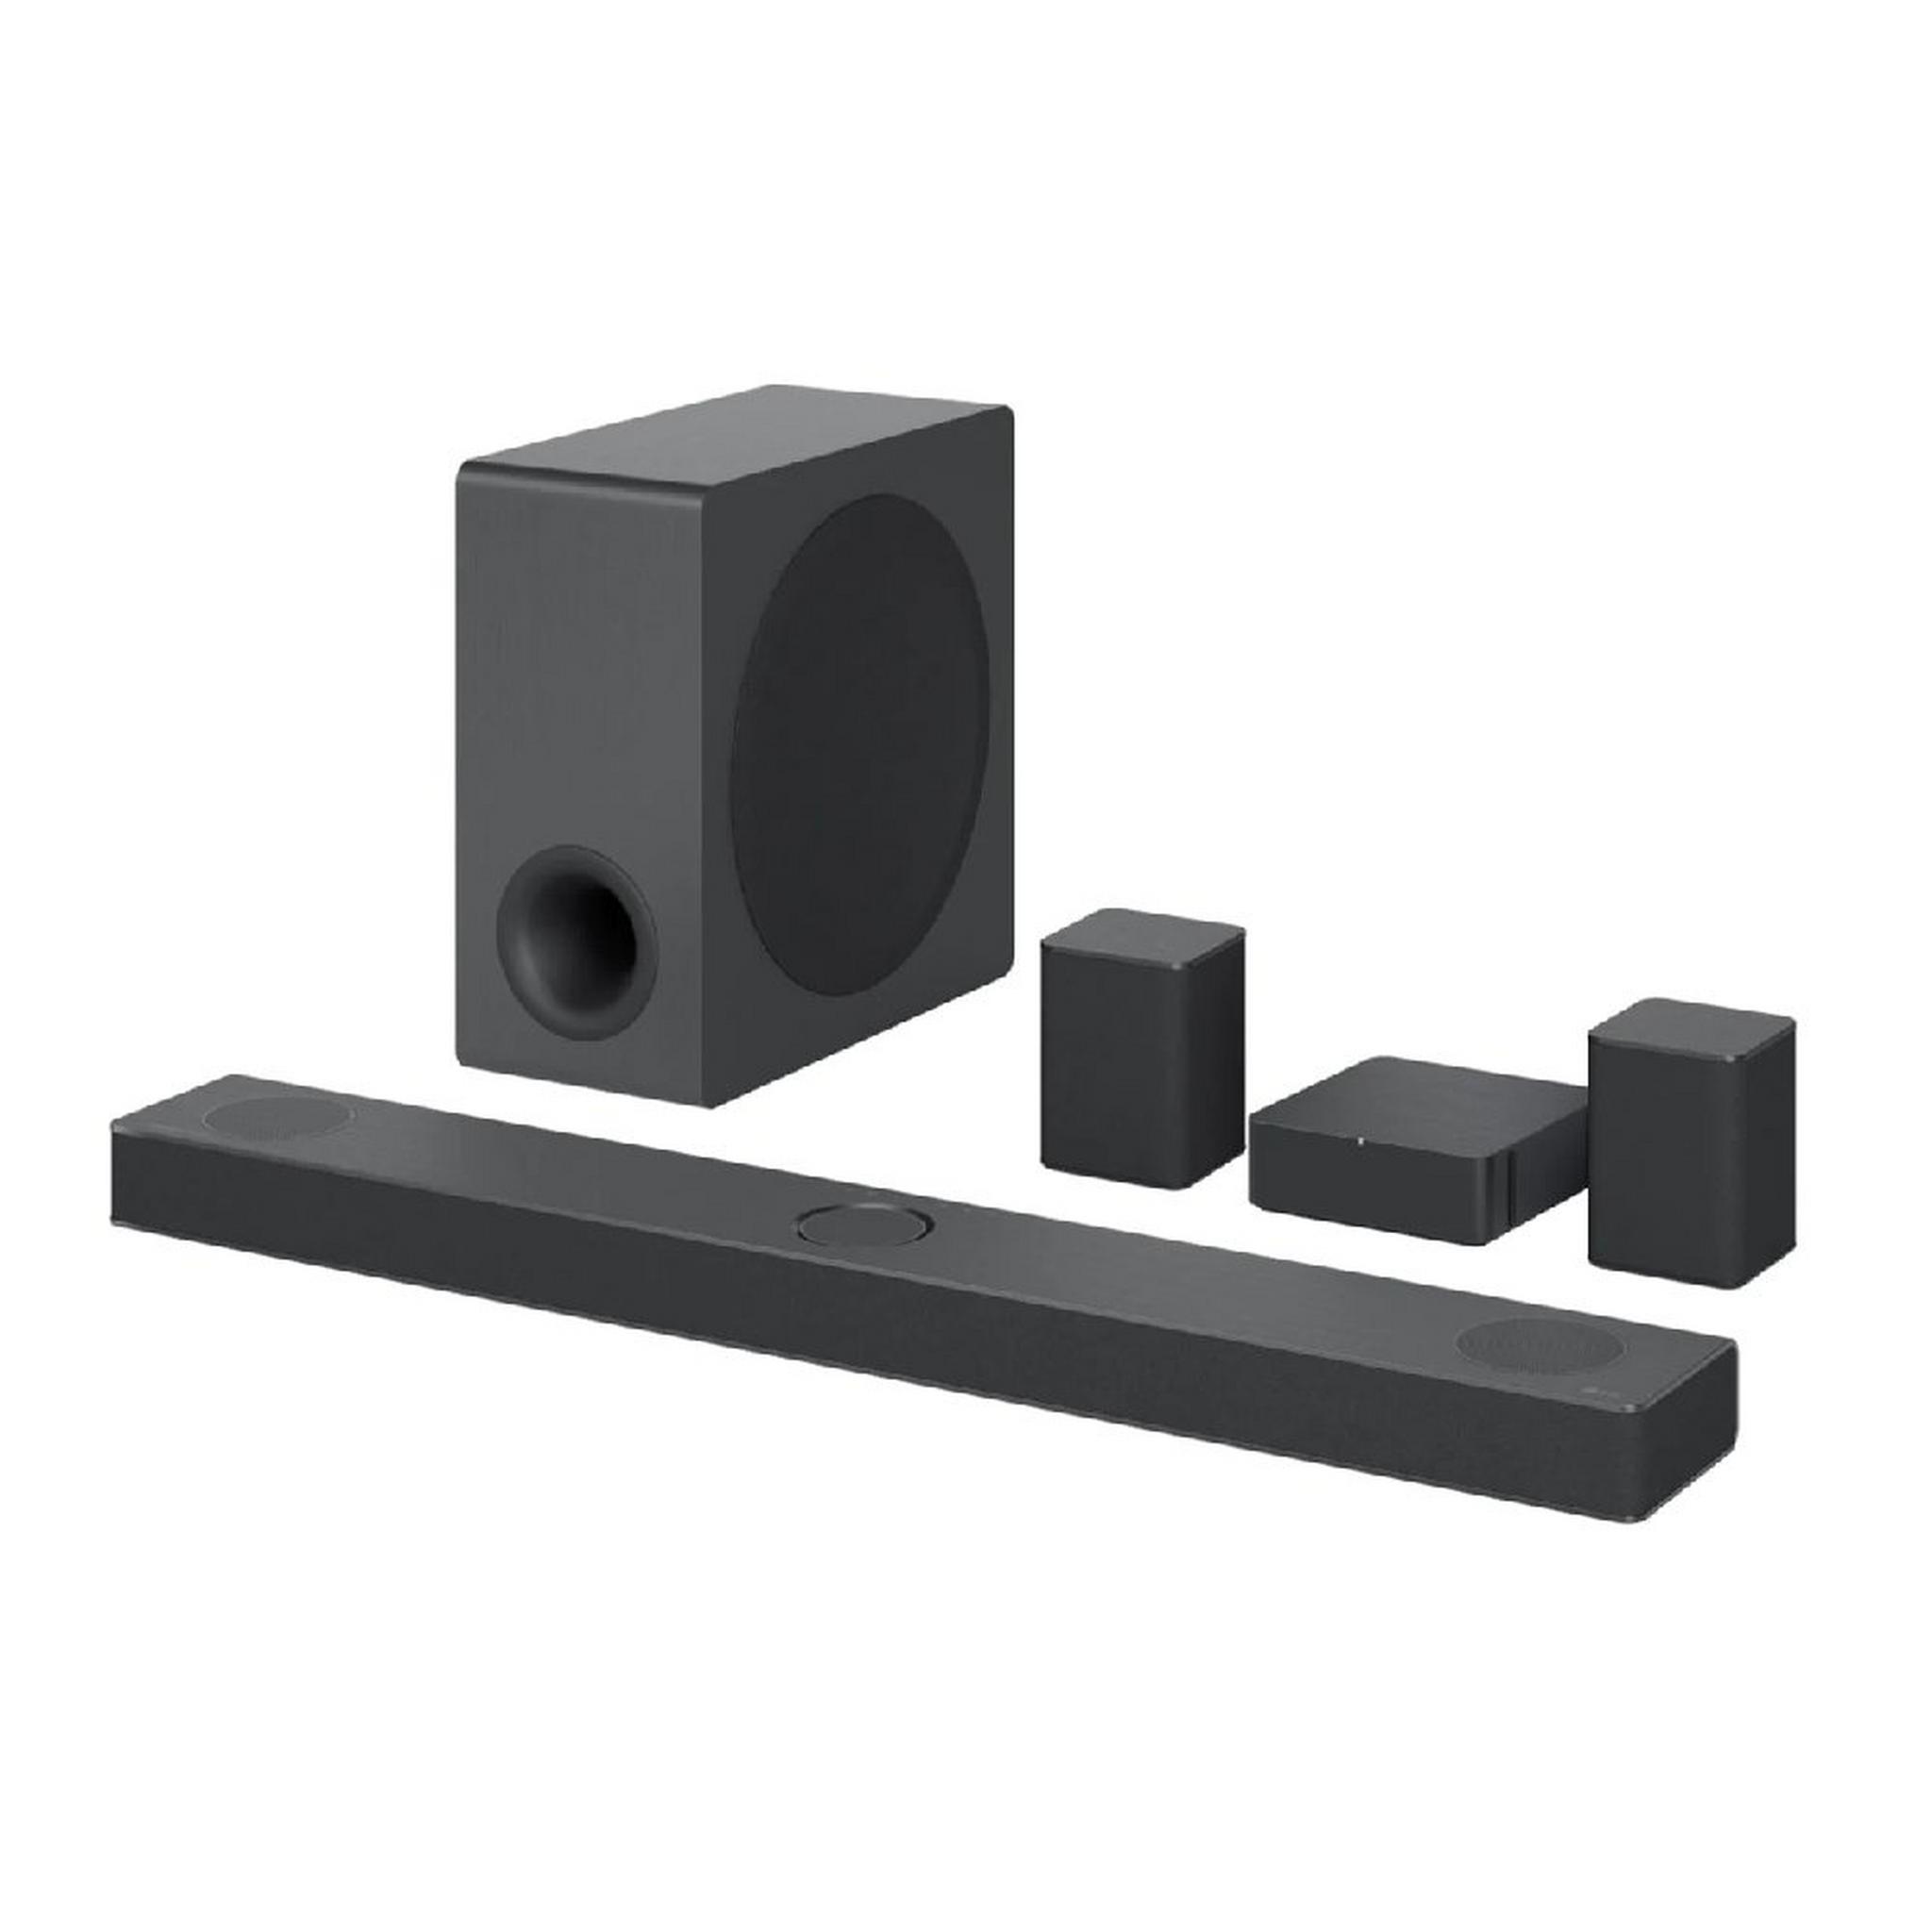 LG Sound Bar, Subwoofer and Surround Speakers, 5.1.3 Channel, 620 Watts, S80QR – Black